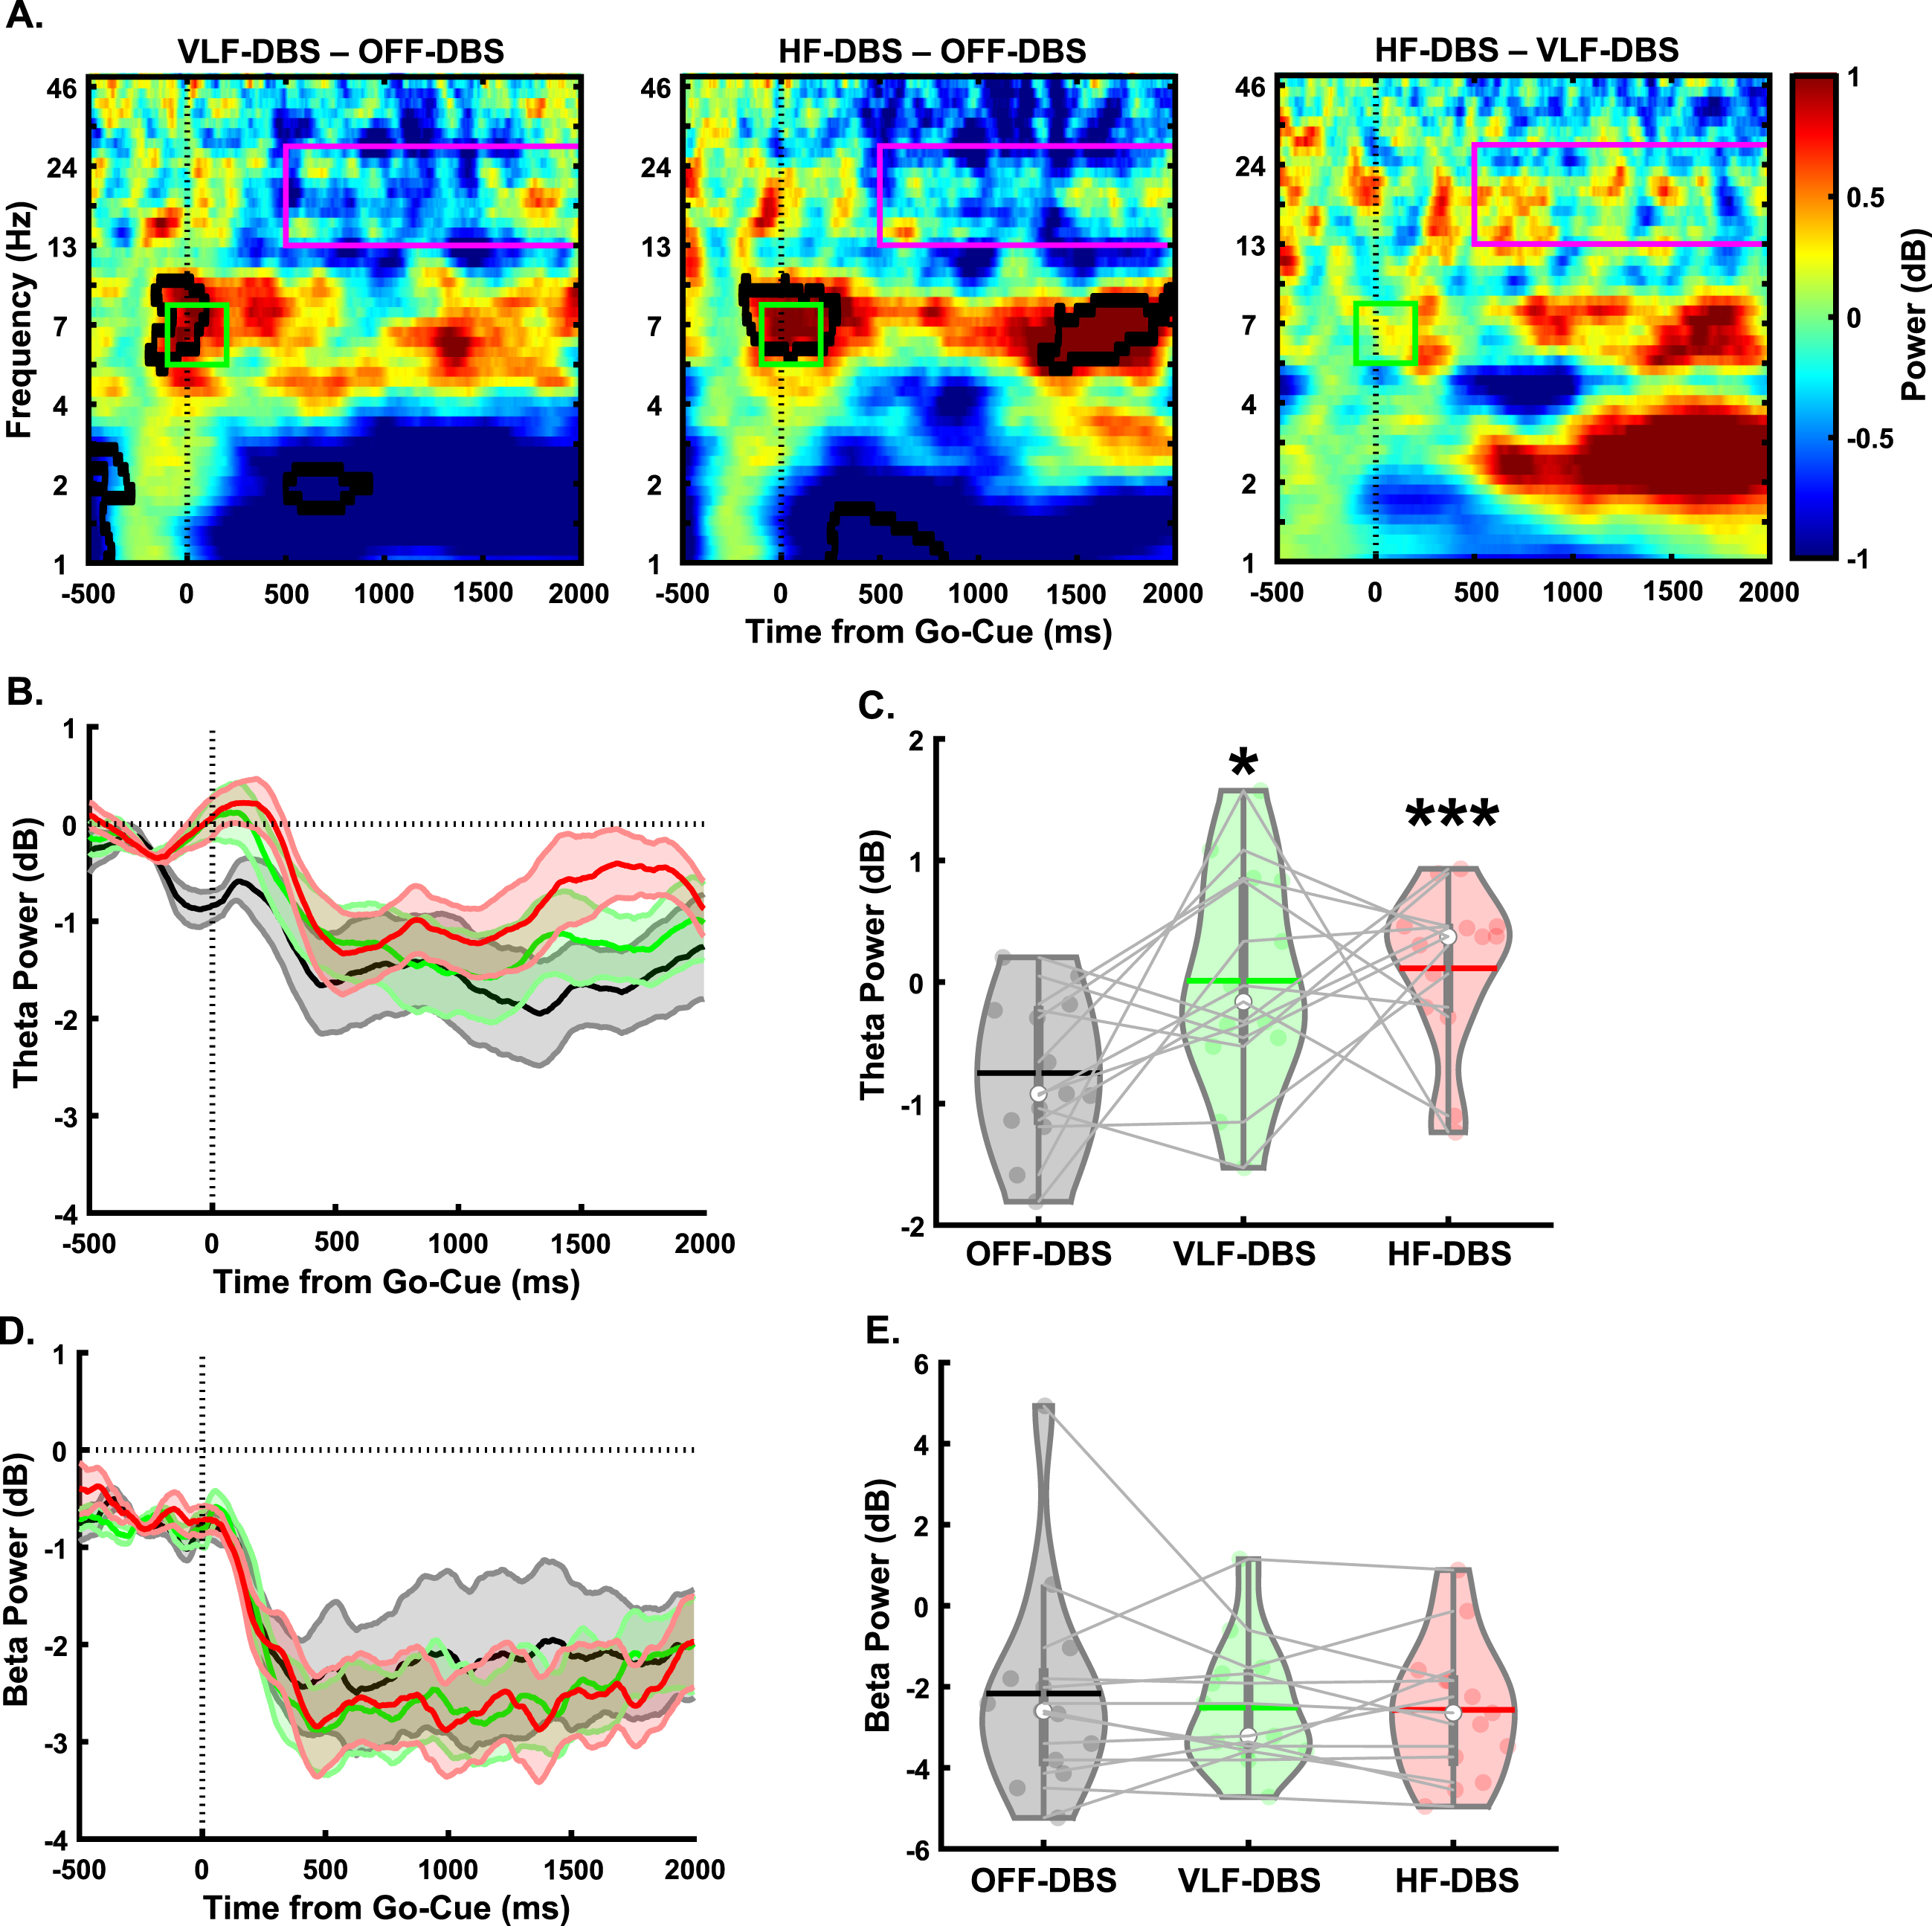 Effects of STN-DBS on motor cortical EEG oscillations during a lower-limb pedaling task. A) Time-frequency plots demonstrating differences between STN very low-frequency (VLF)-DBS and OFF-DBS (left), high-frequency (HF)-DBS and OFF-DBS (middle), and HF-DBS and VLF-DBS (right). B-C) Theta power is increased with VLF-DBS and HF-DBS during the lower-limb pedaling task. D-E) Beta power is unaffected with VLF-DBS and HF-DBS. *p < 0.05 vs. OFF-DBS. ***p < 0.001 vs. OFF-DBS. In violin plots, horizontal lines and white circles represent the mean and median values, respectively.